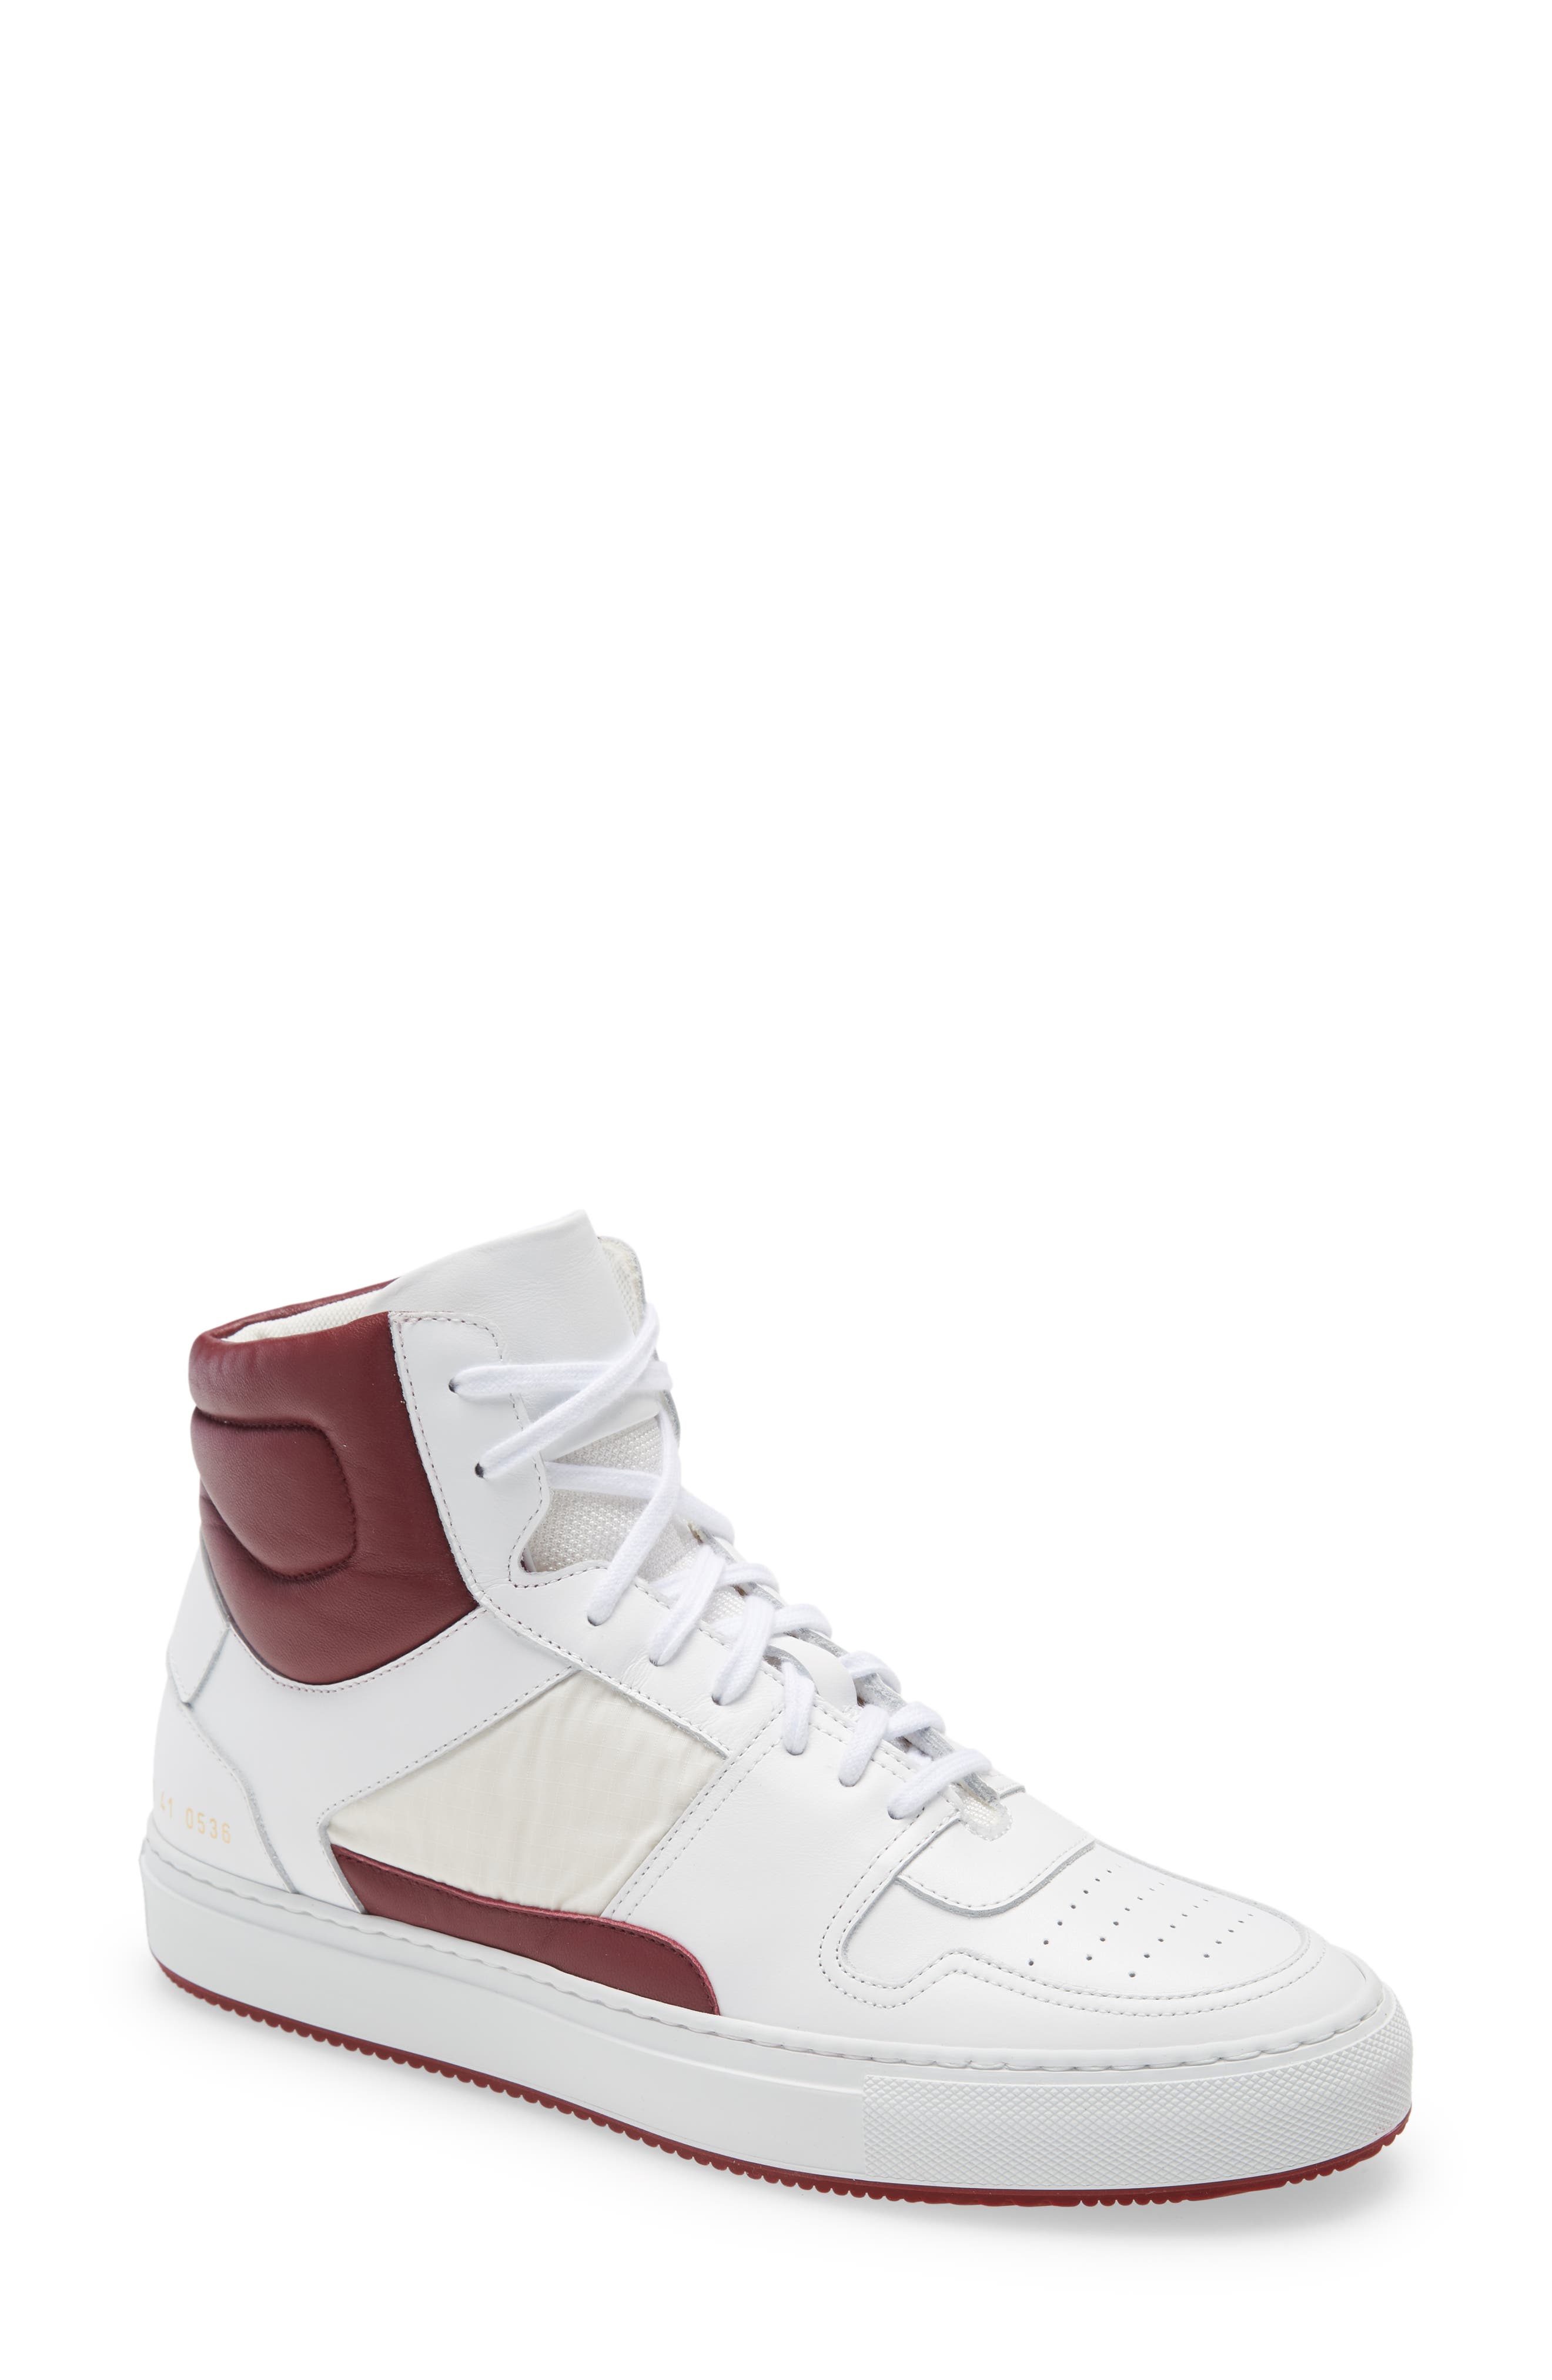 Common Projects High Top Sneaker in White/Red at Nordstrom, Size 9Us